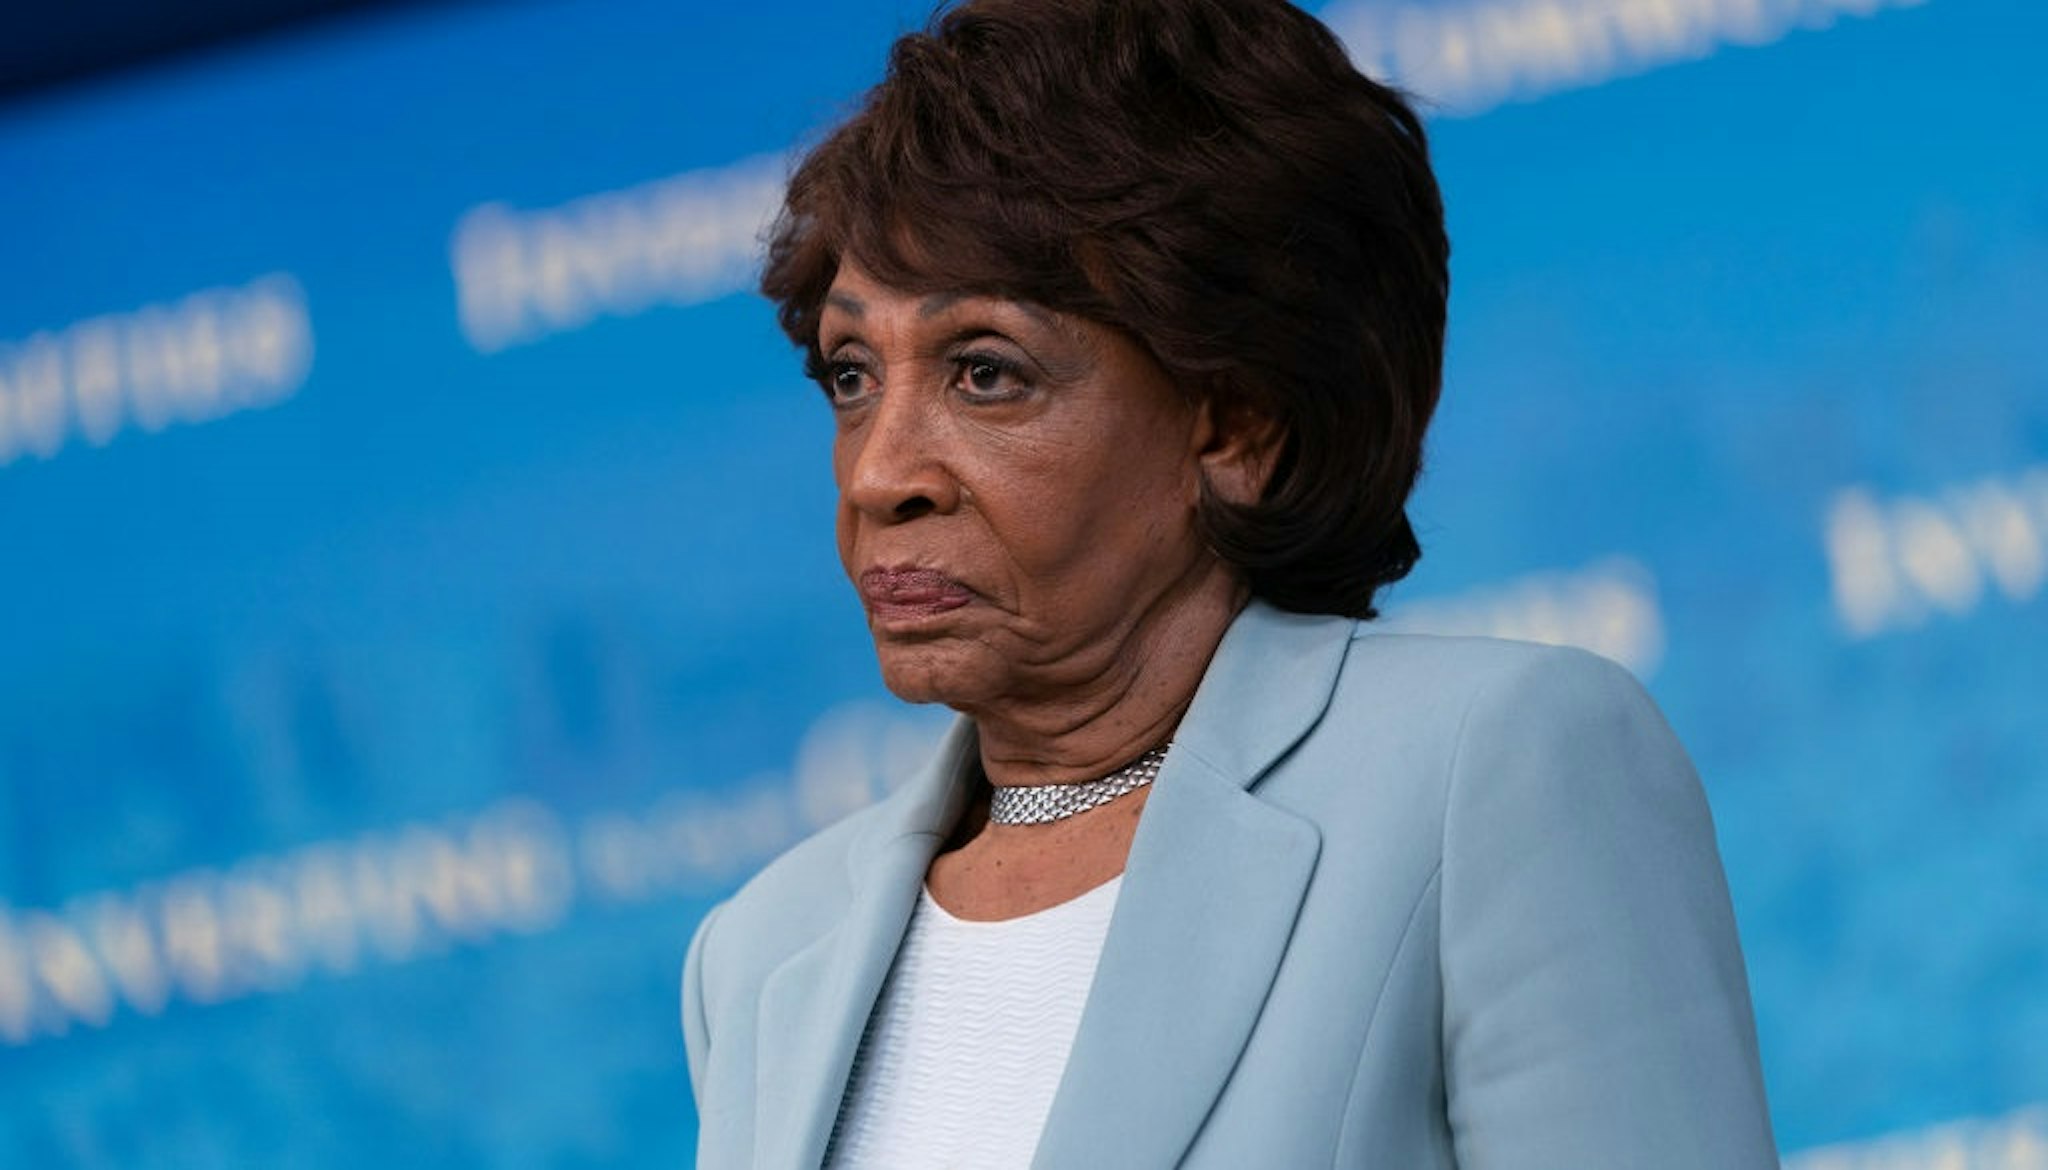 Representative Maxine Waters, a Democrat from California, listens during an event in the Eisenhower Executive Office Building in Washington, D.C., U.S., on Tuesday, June 15, 2021.